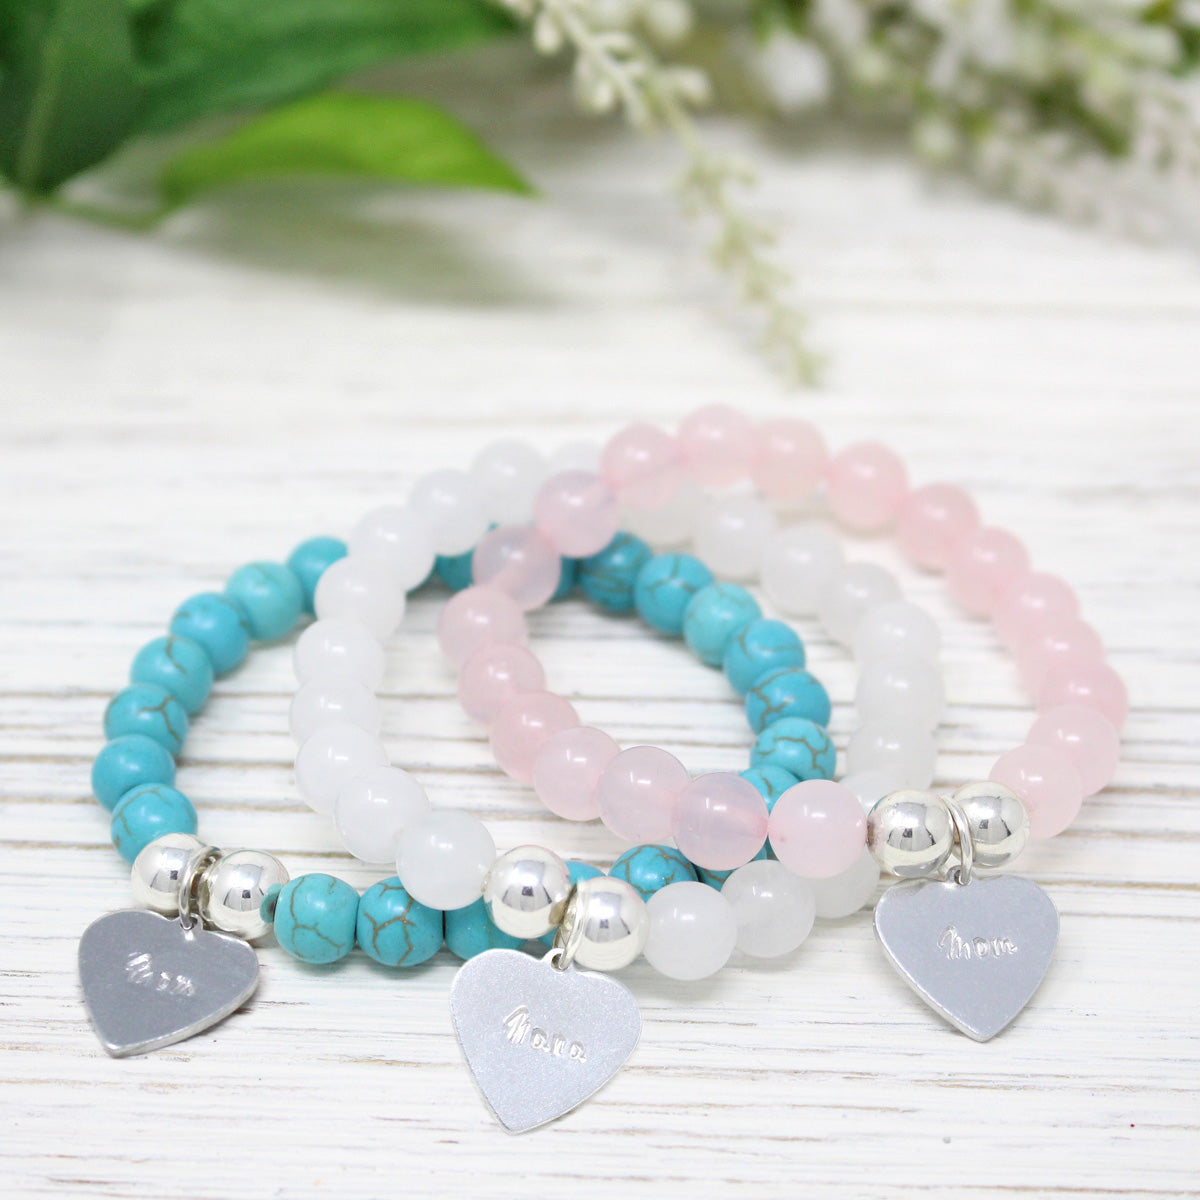 Gemstone Bracelet with "hand-stamped' heart charm